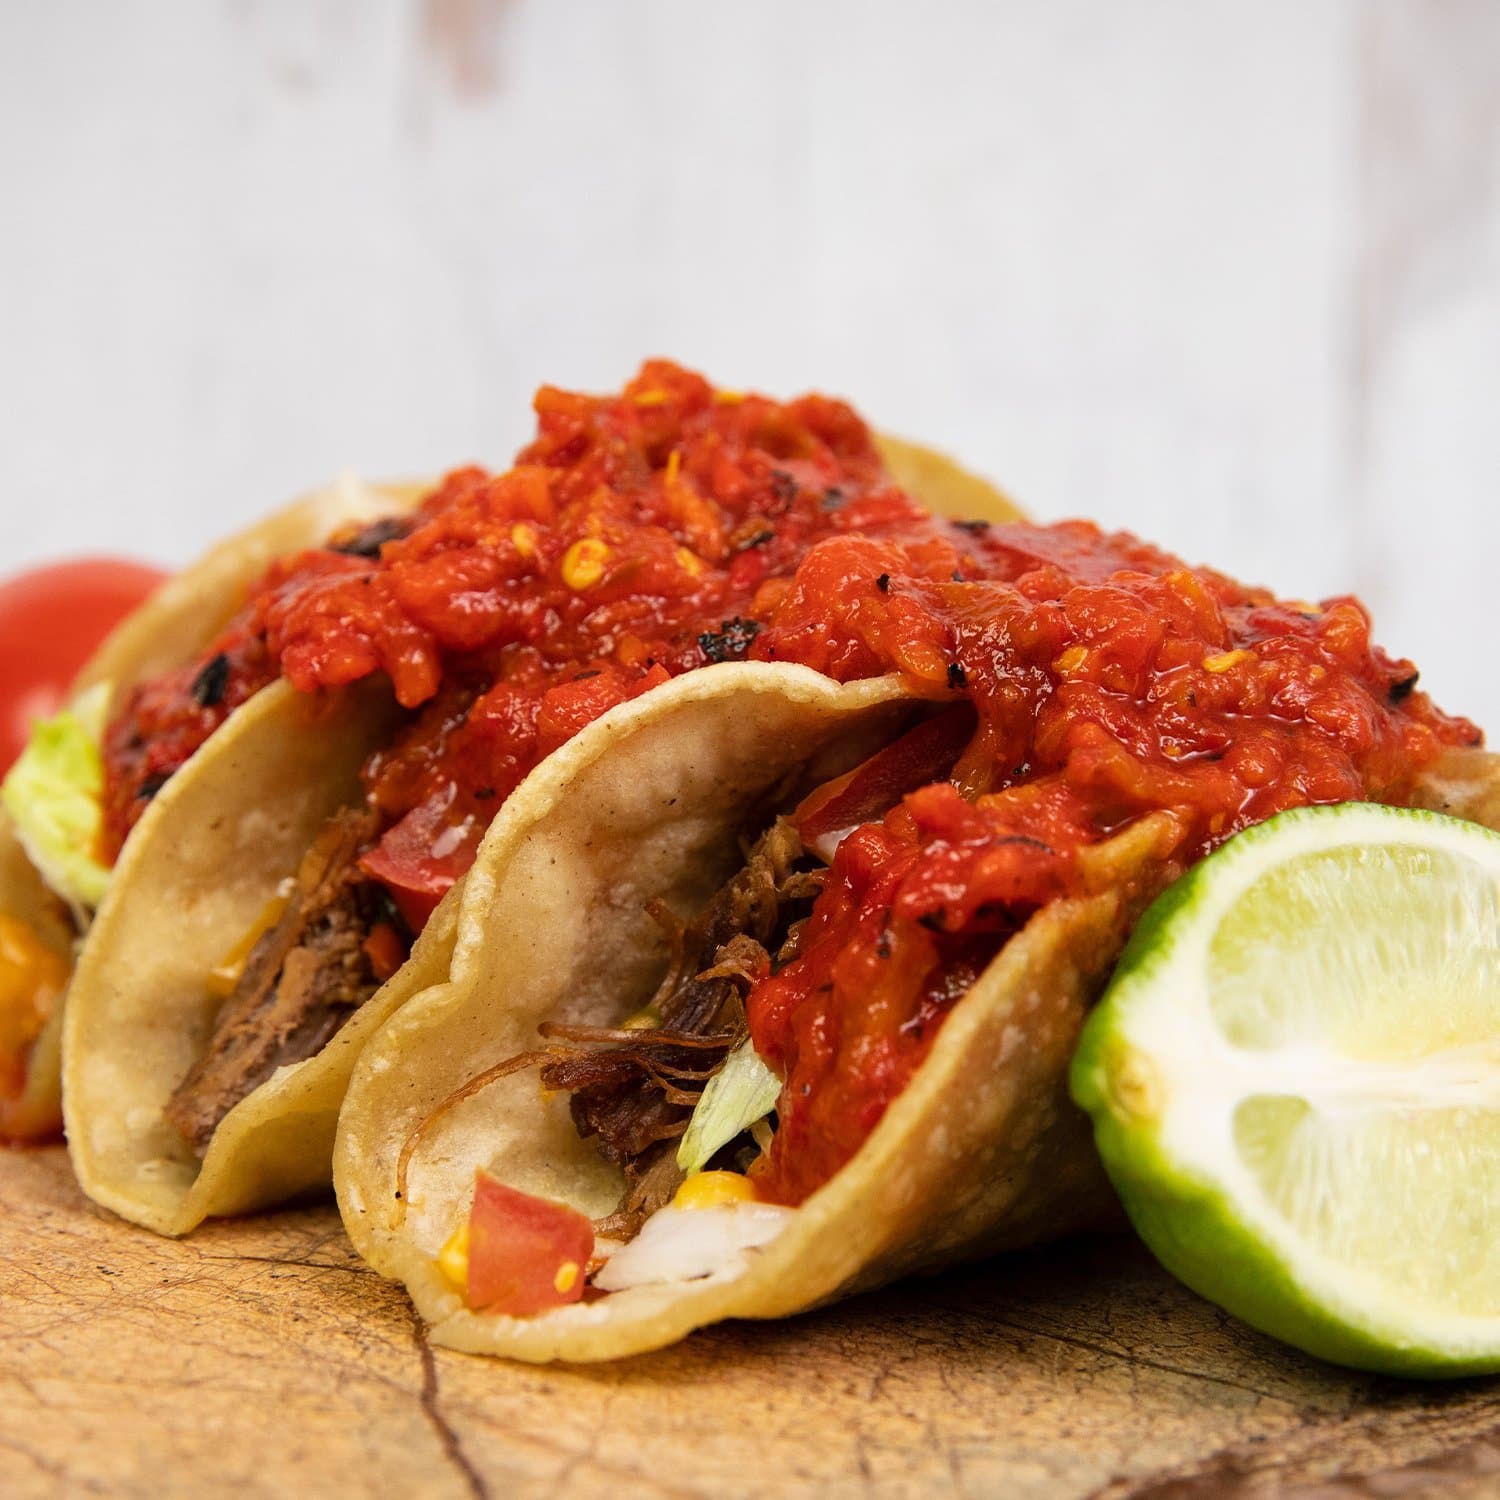 Three gluten-free tacos filled with Hatch Red Chile Roast and topped with salsa on a wooden surface, garnished with lime wedges and a blurred tomato in the background.